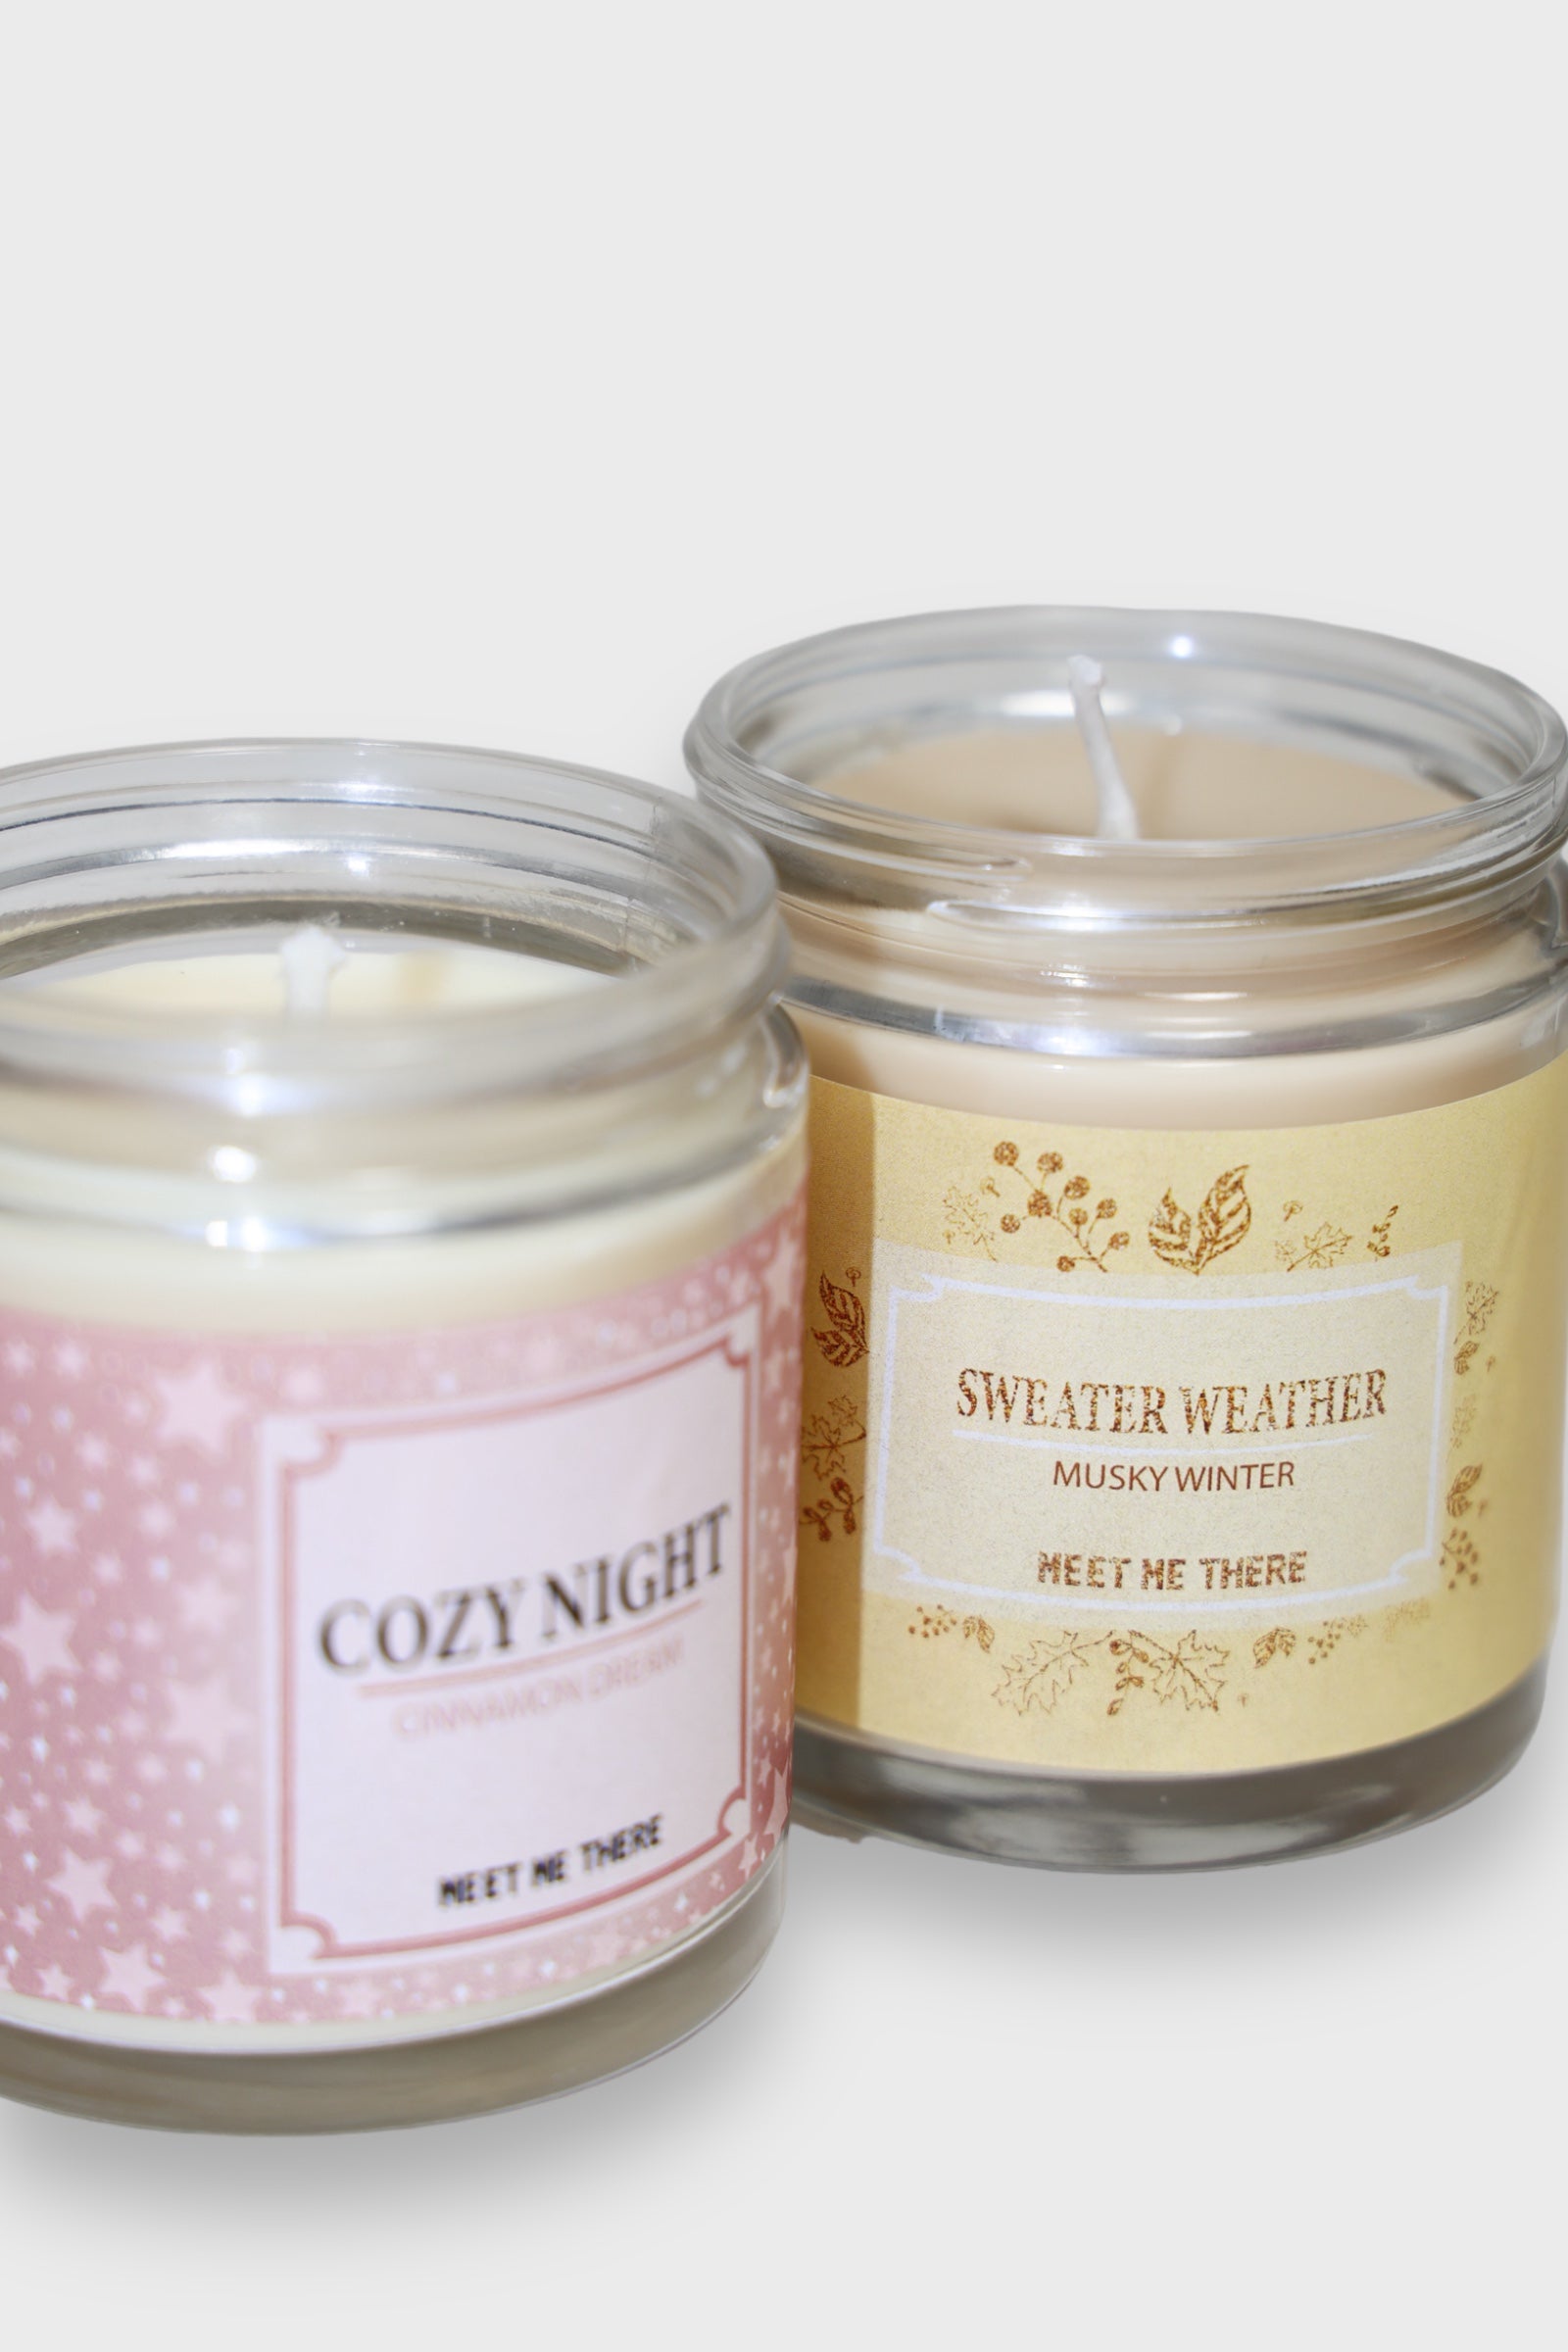 "Cozy night" candle